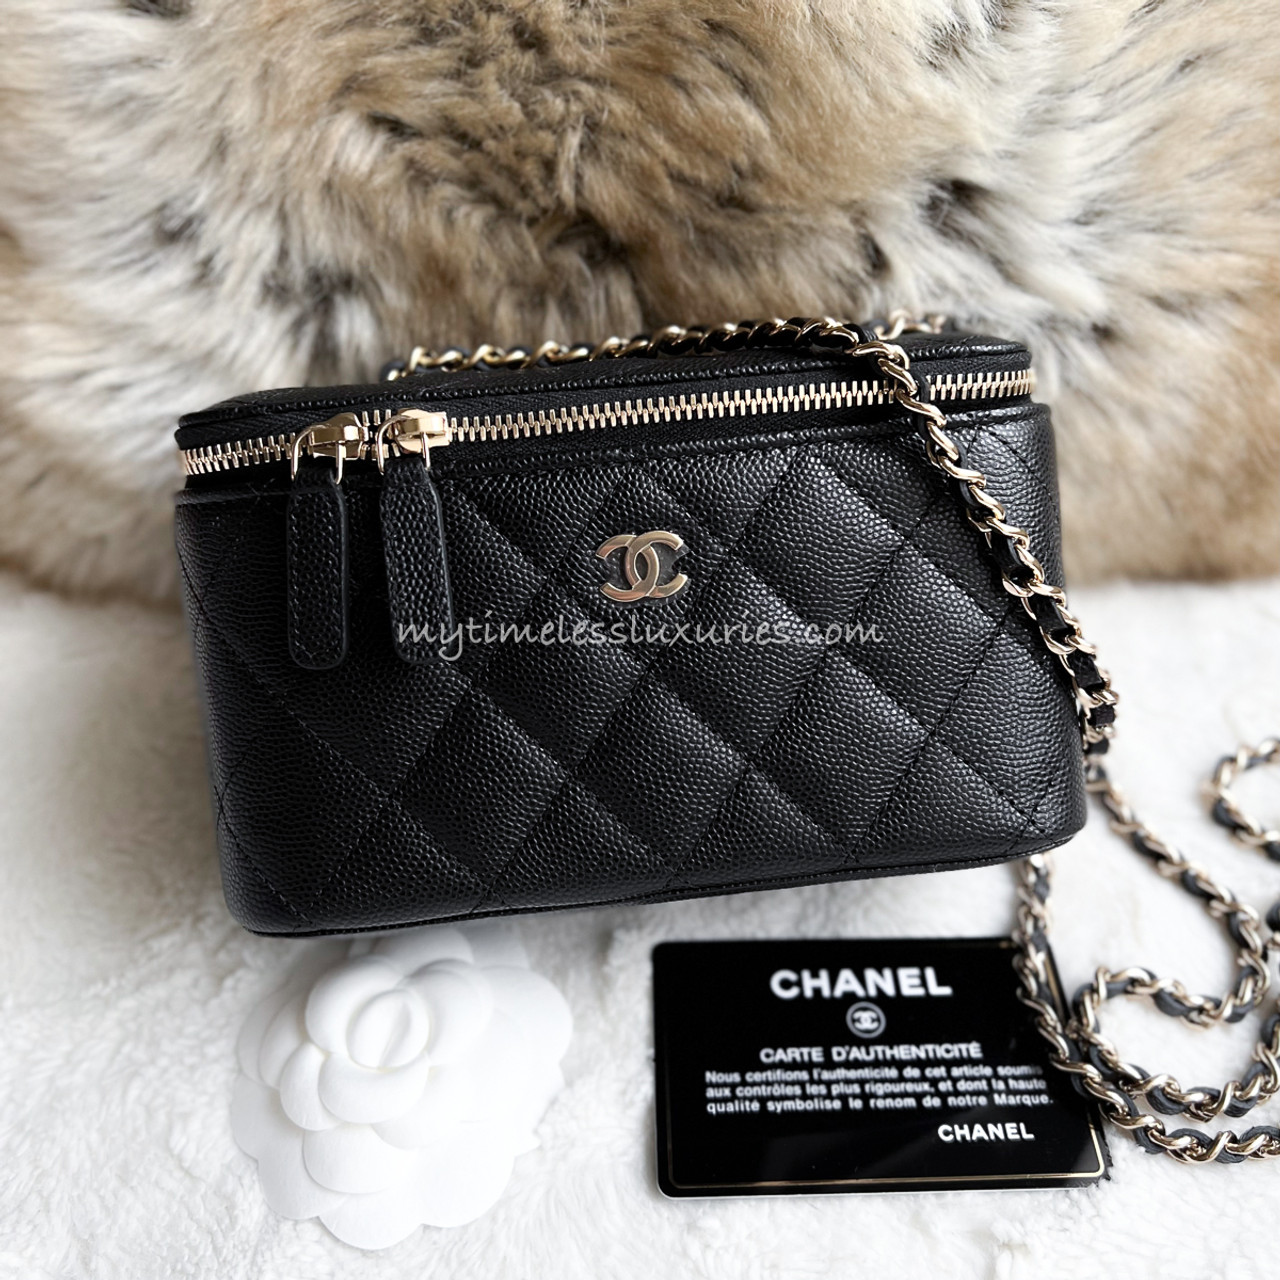 Authentic Second Hand Chanel Small Filigree Vanity Case Bag PSS14300131   THE FIFTH COLLECTION